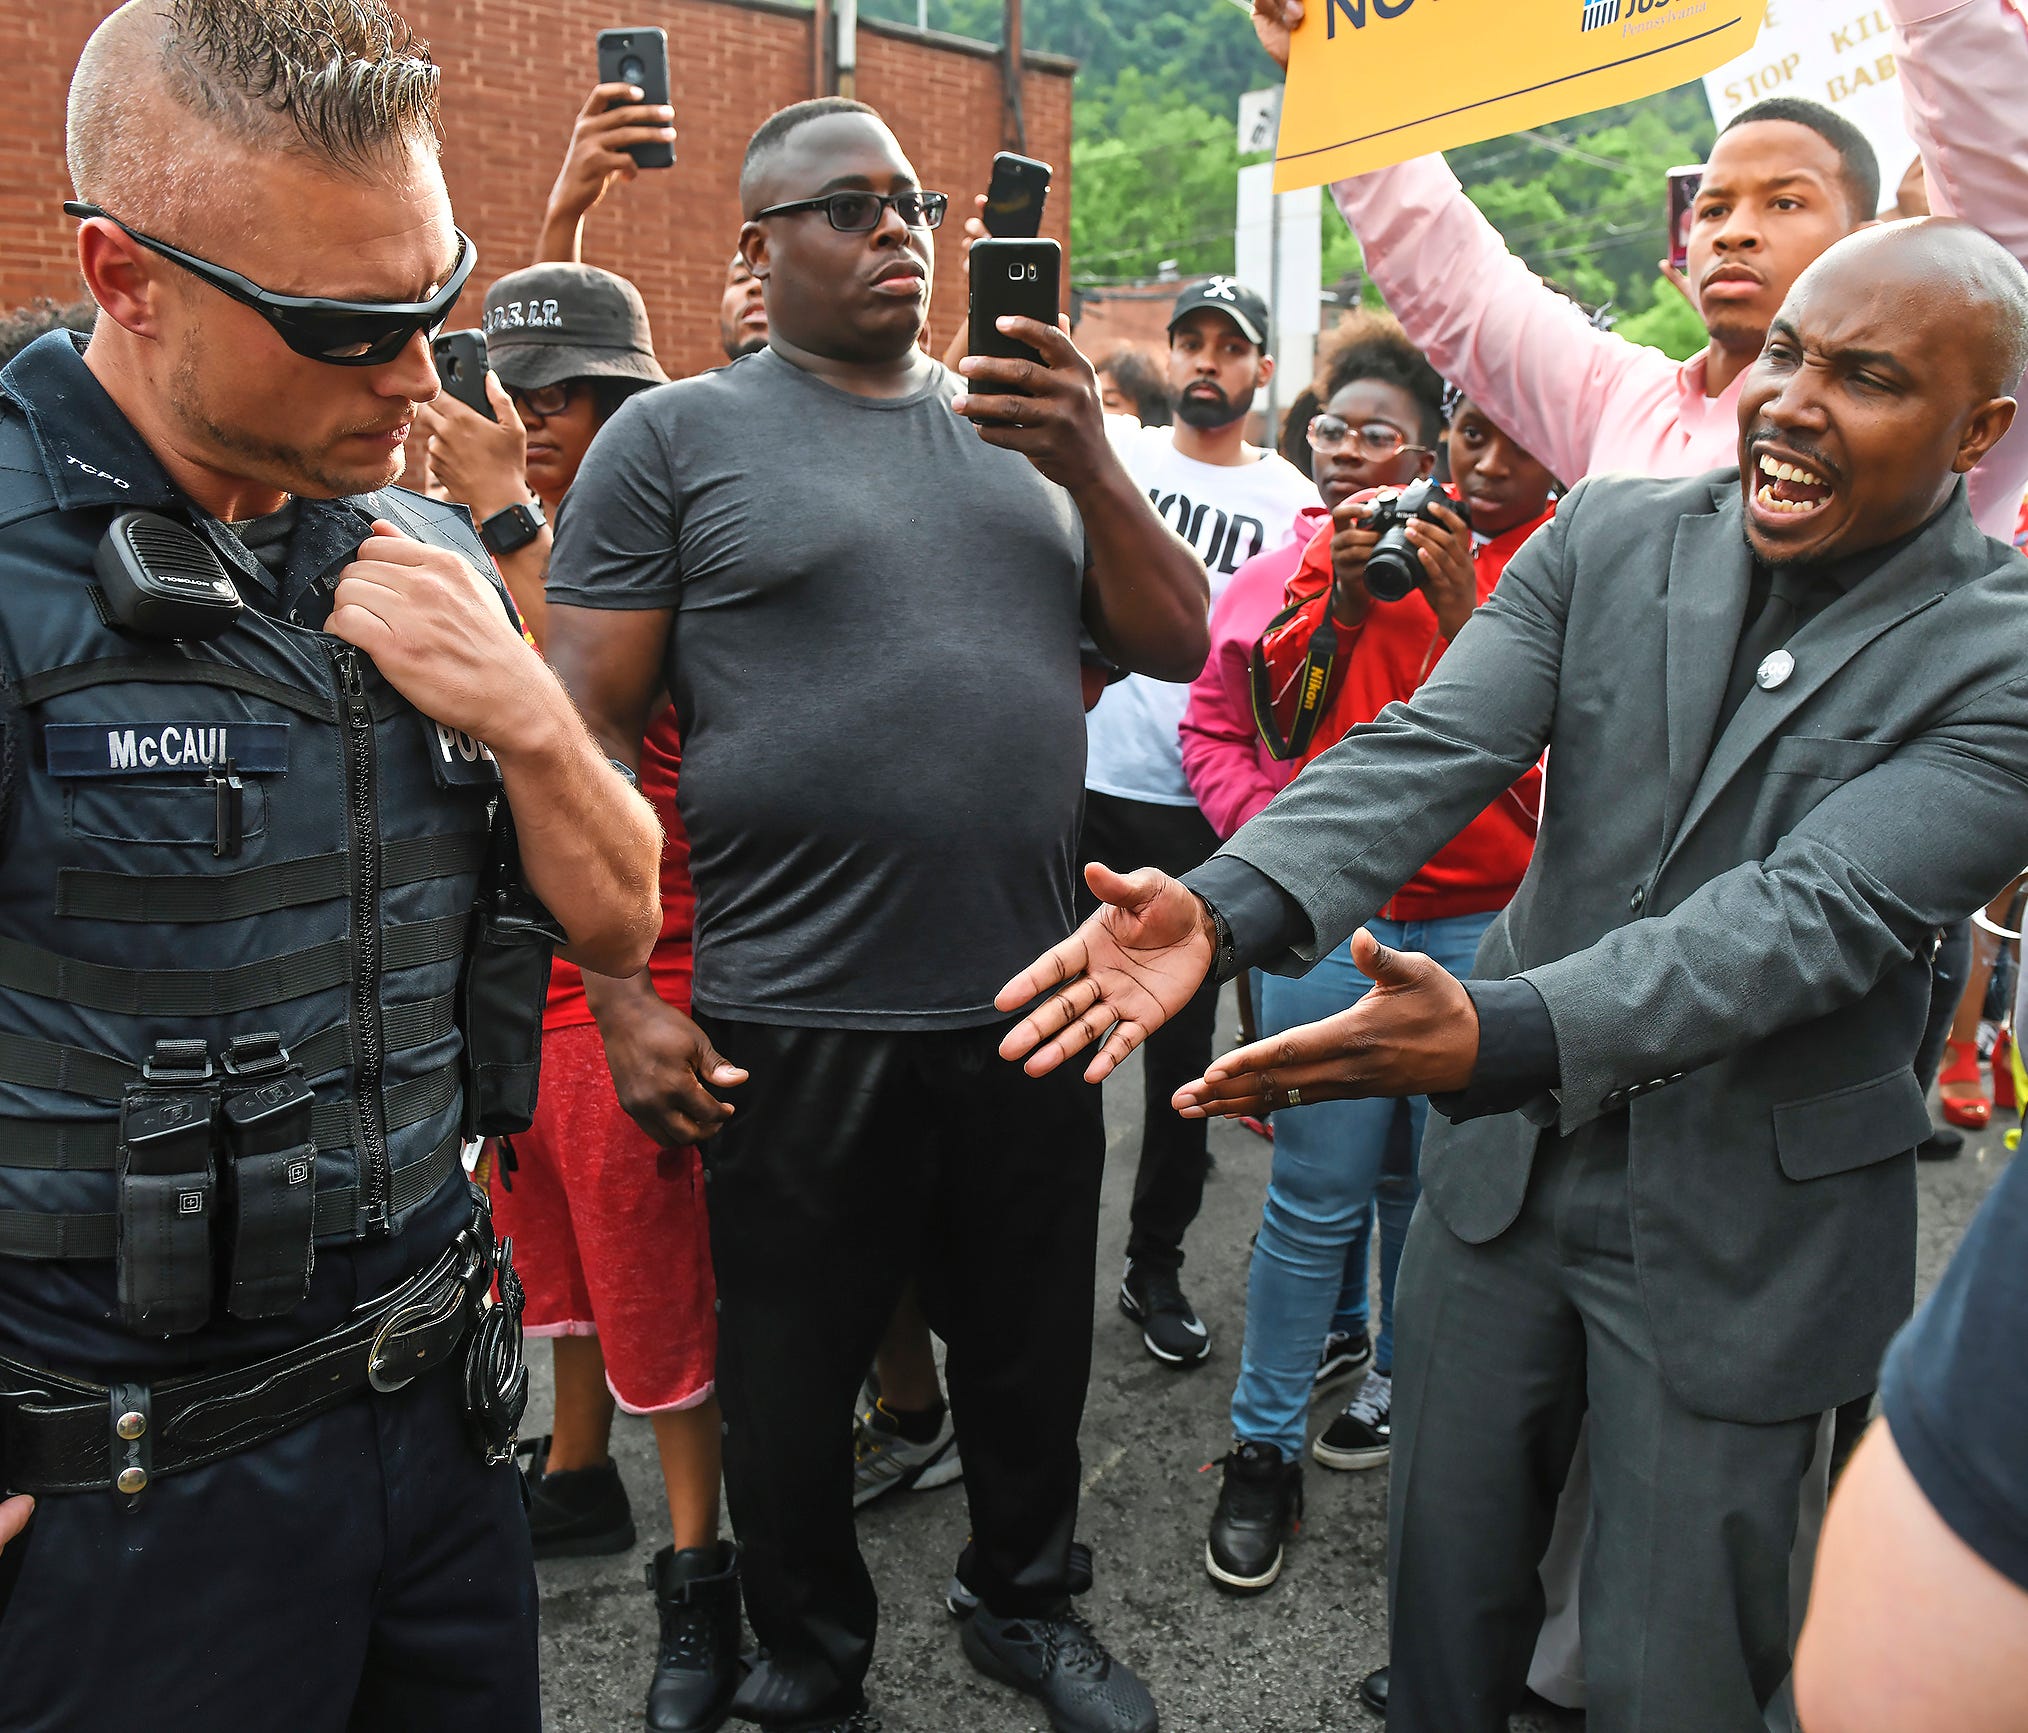 Leonard Hammonds II, of Penn Hills, right, points out that a Turtle Creek Police officer has his had on his weapon during a rally in East Pittsburgh, Pa., on Wednesday, June 20, 2018, at a protest regarding the shooting death of Antwon Rose by an Eas